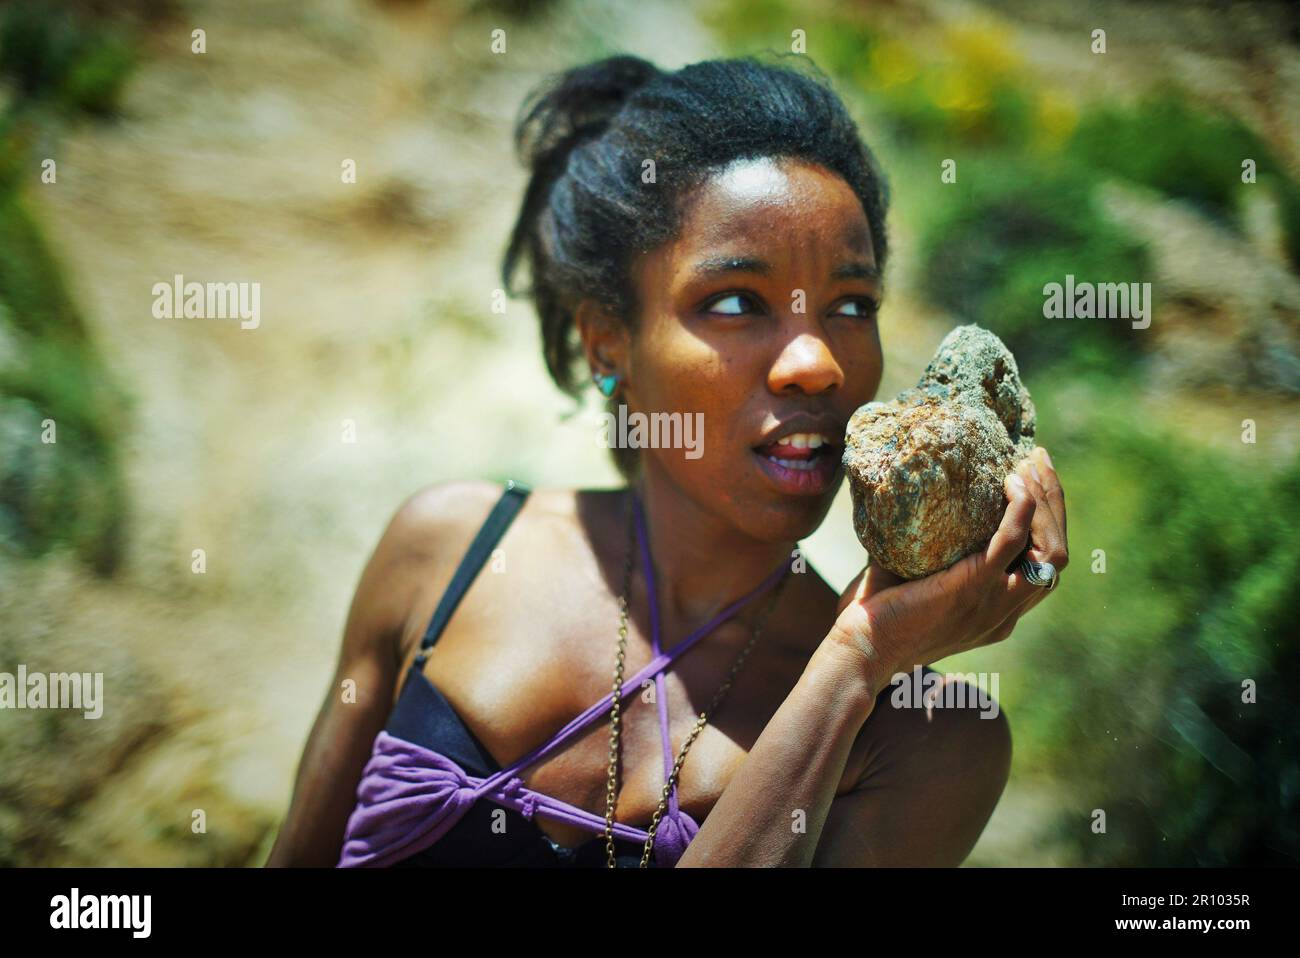 Beautiful Black woman in purple clothing stranded on a desert island Stock Photo